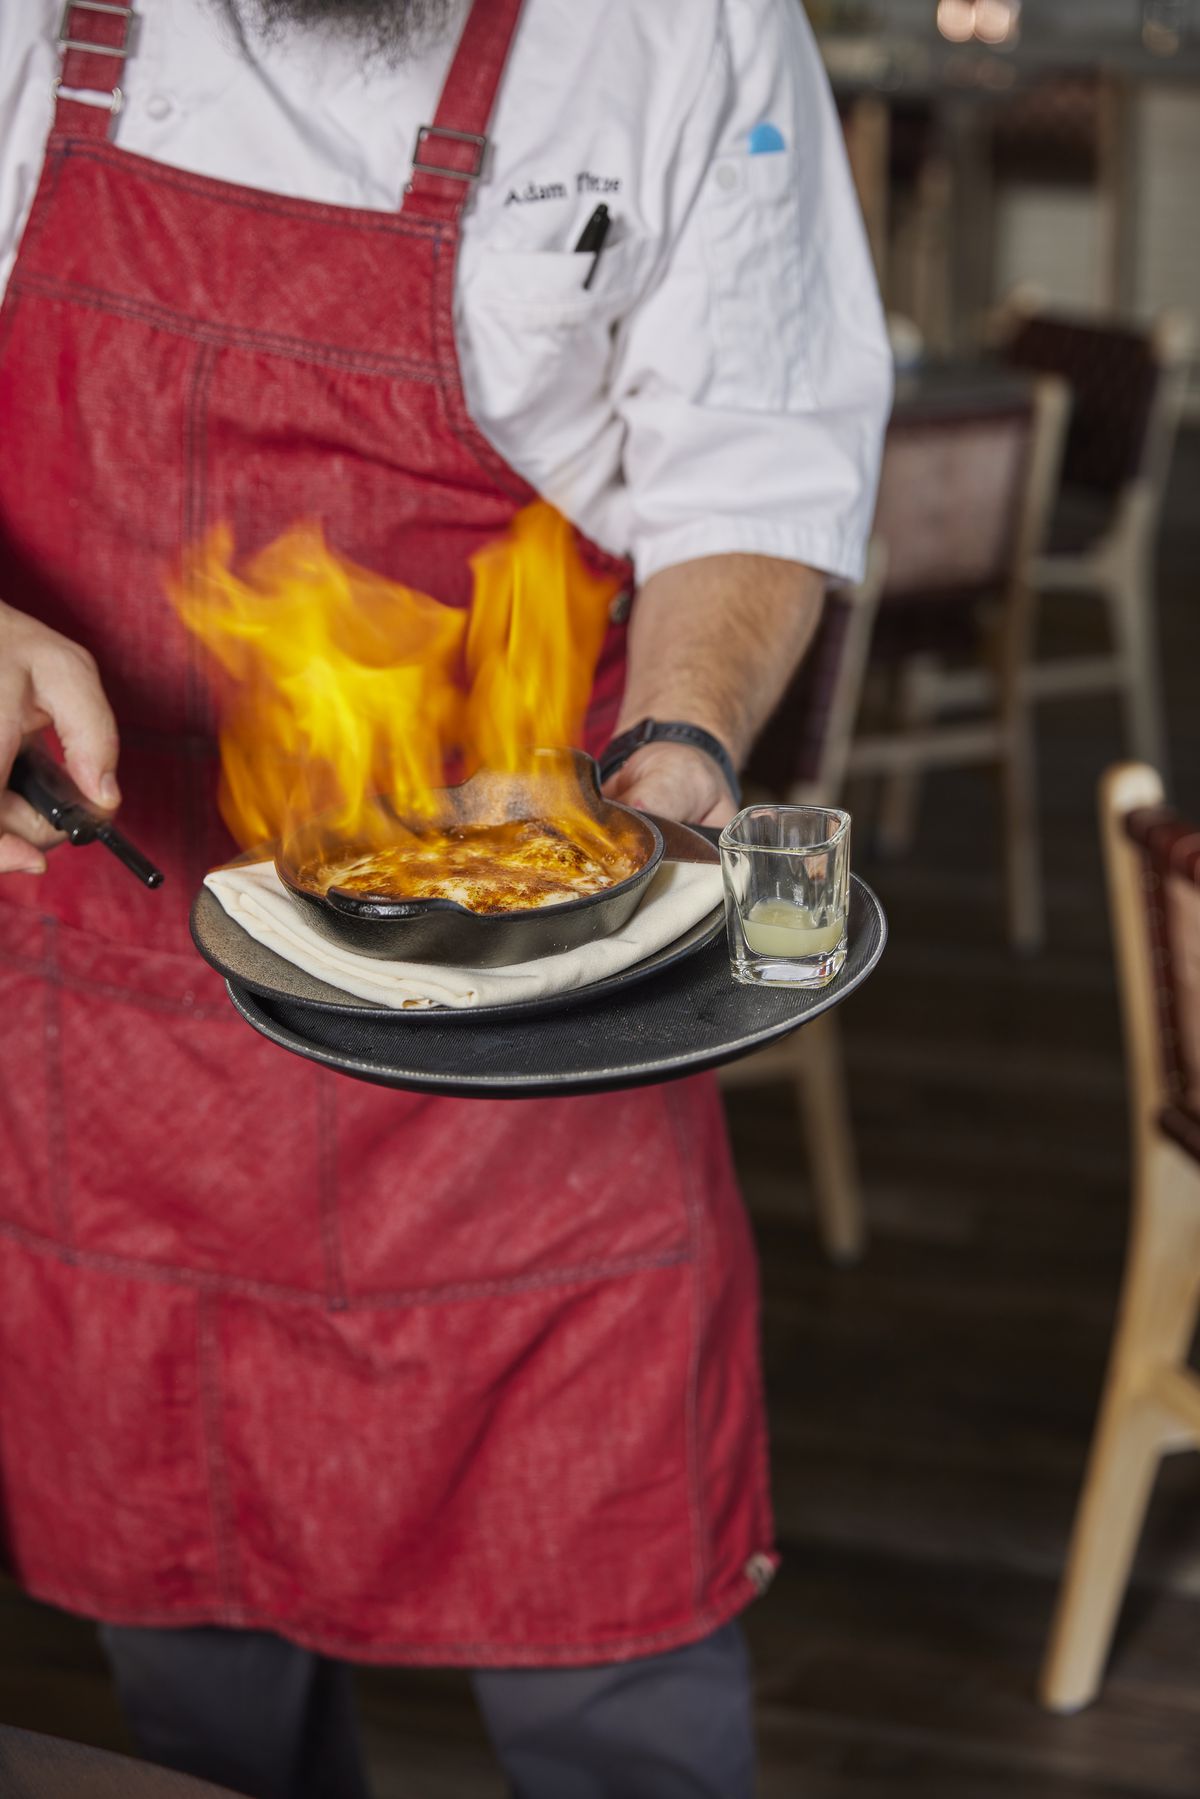 A server walks by with a flaming plate of cheese.